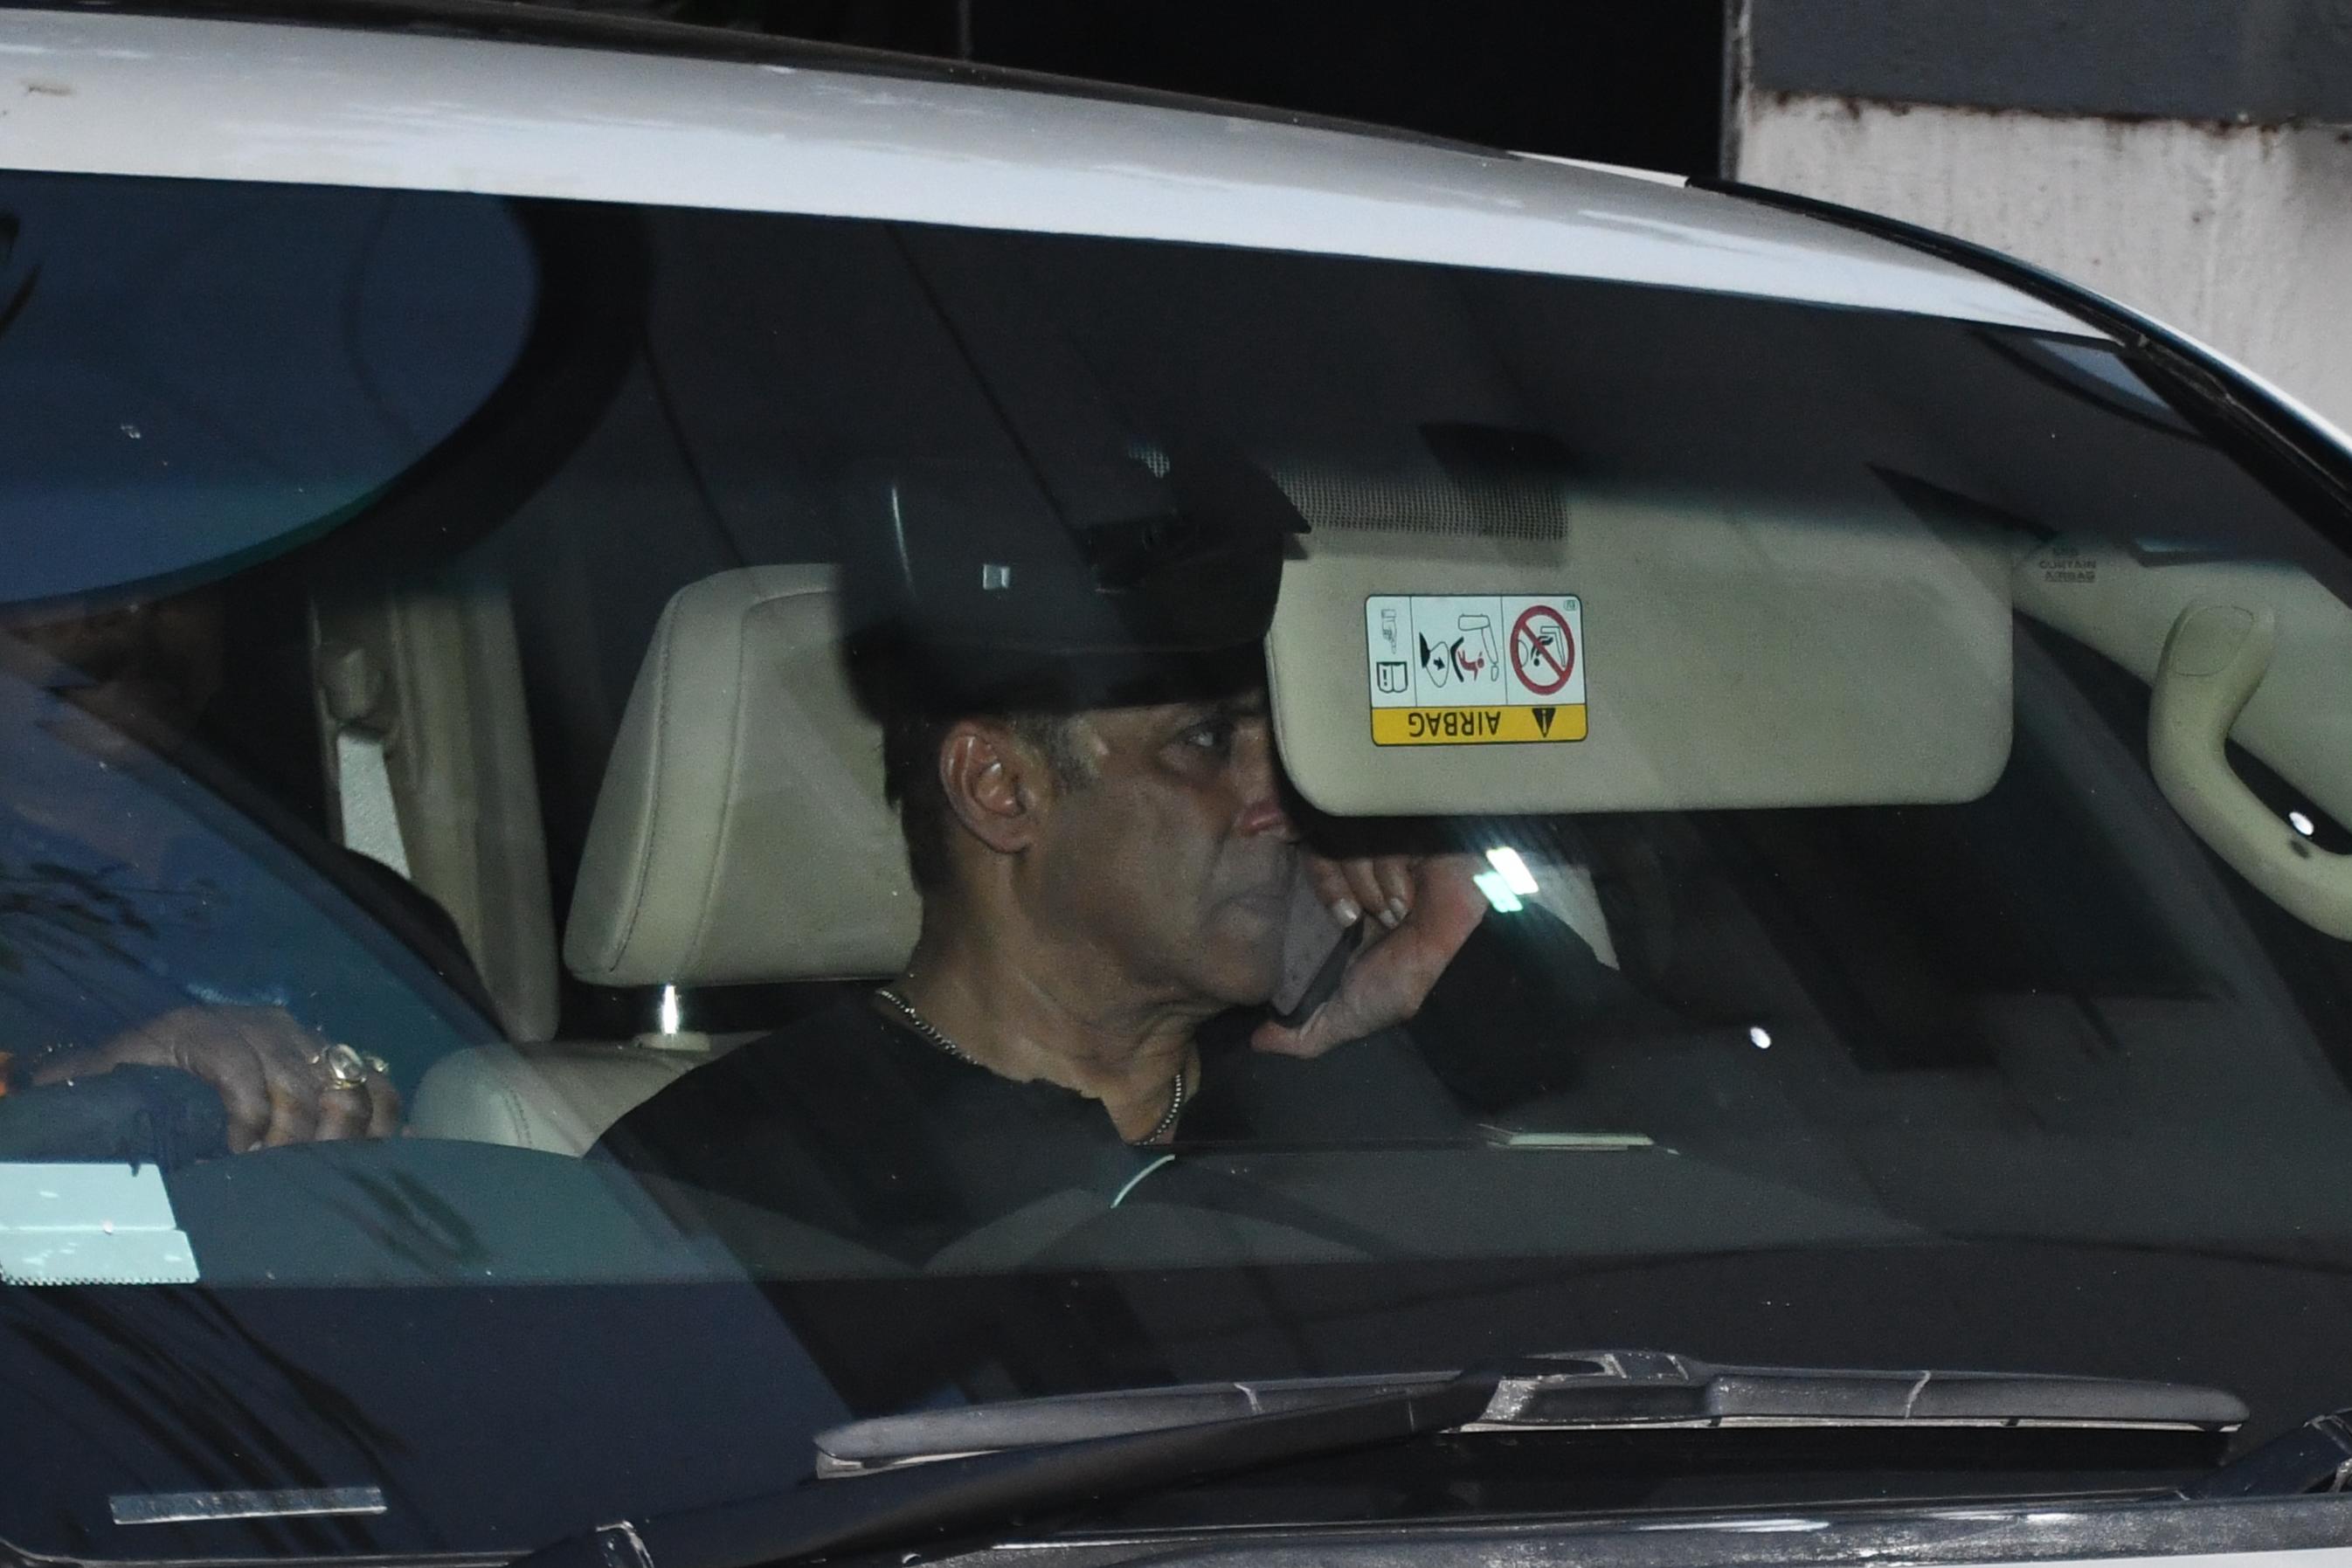 The paps managed to catch a much-awaited glimpse of the Bollywood superstar